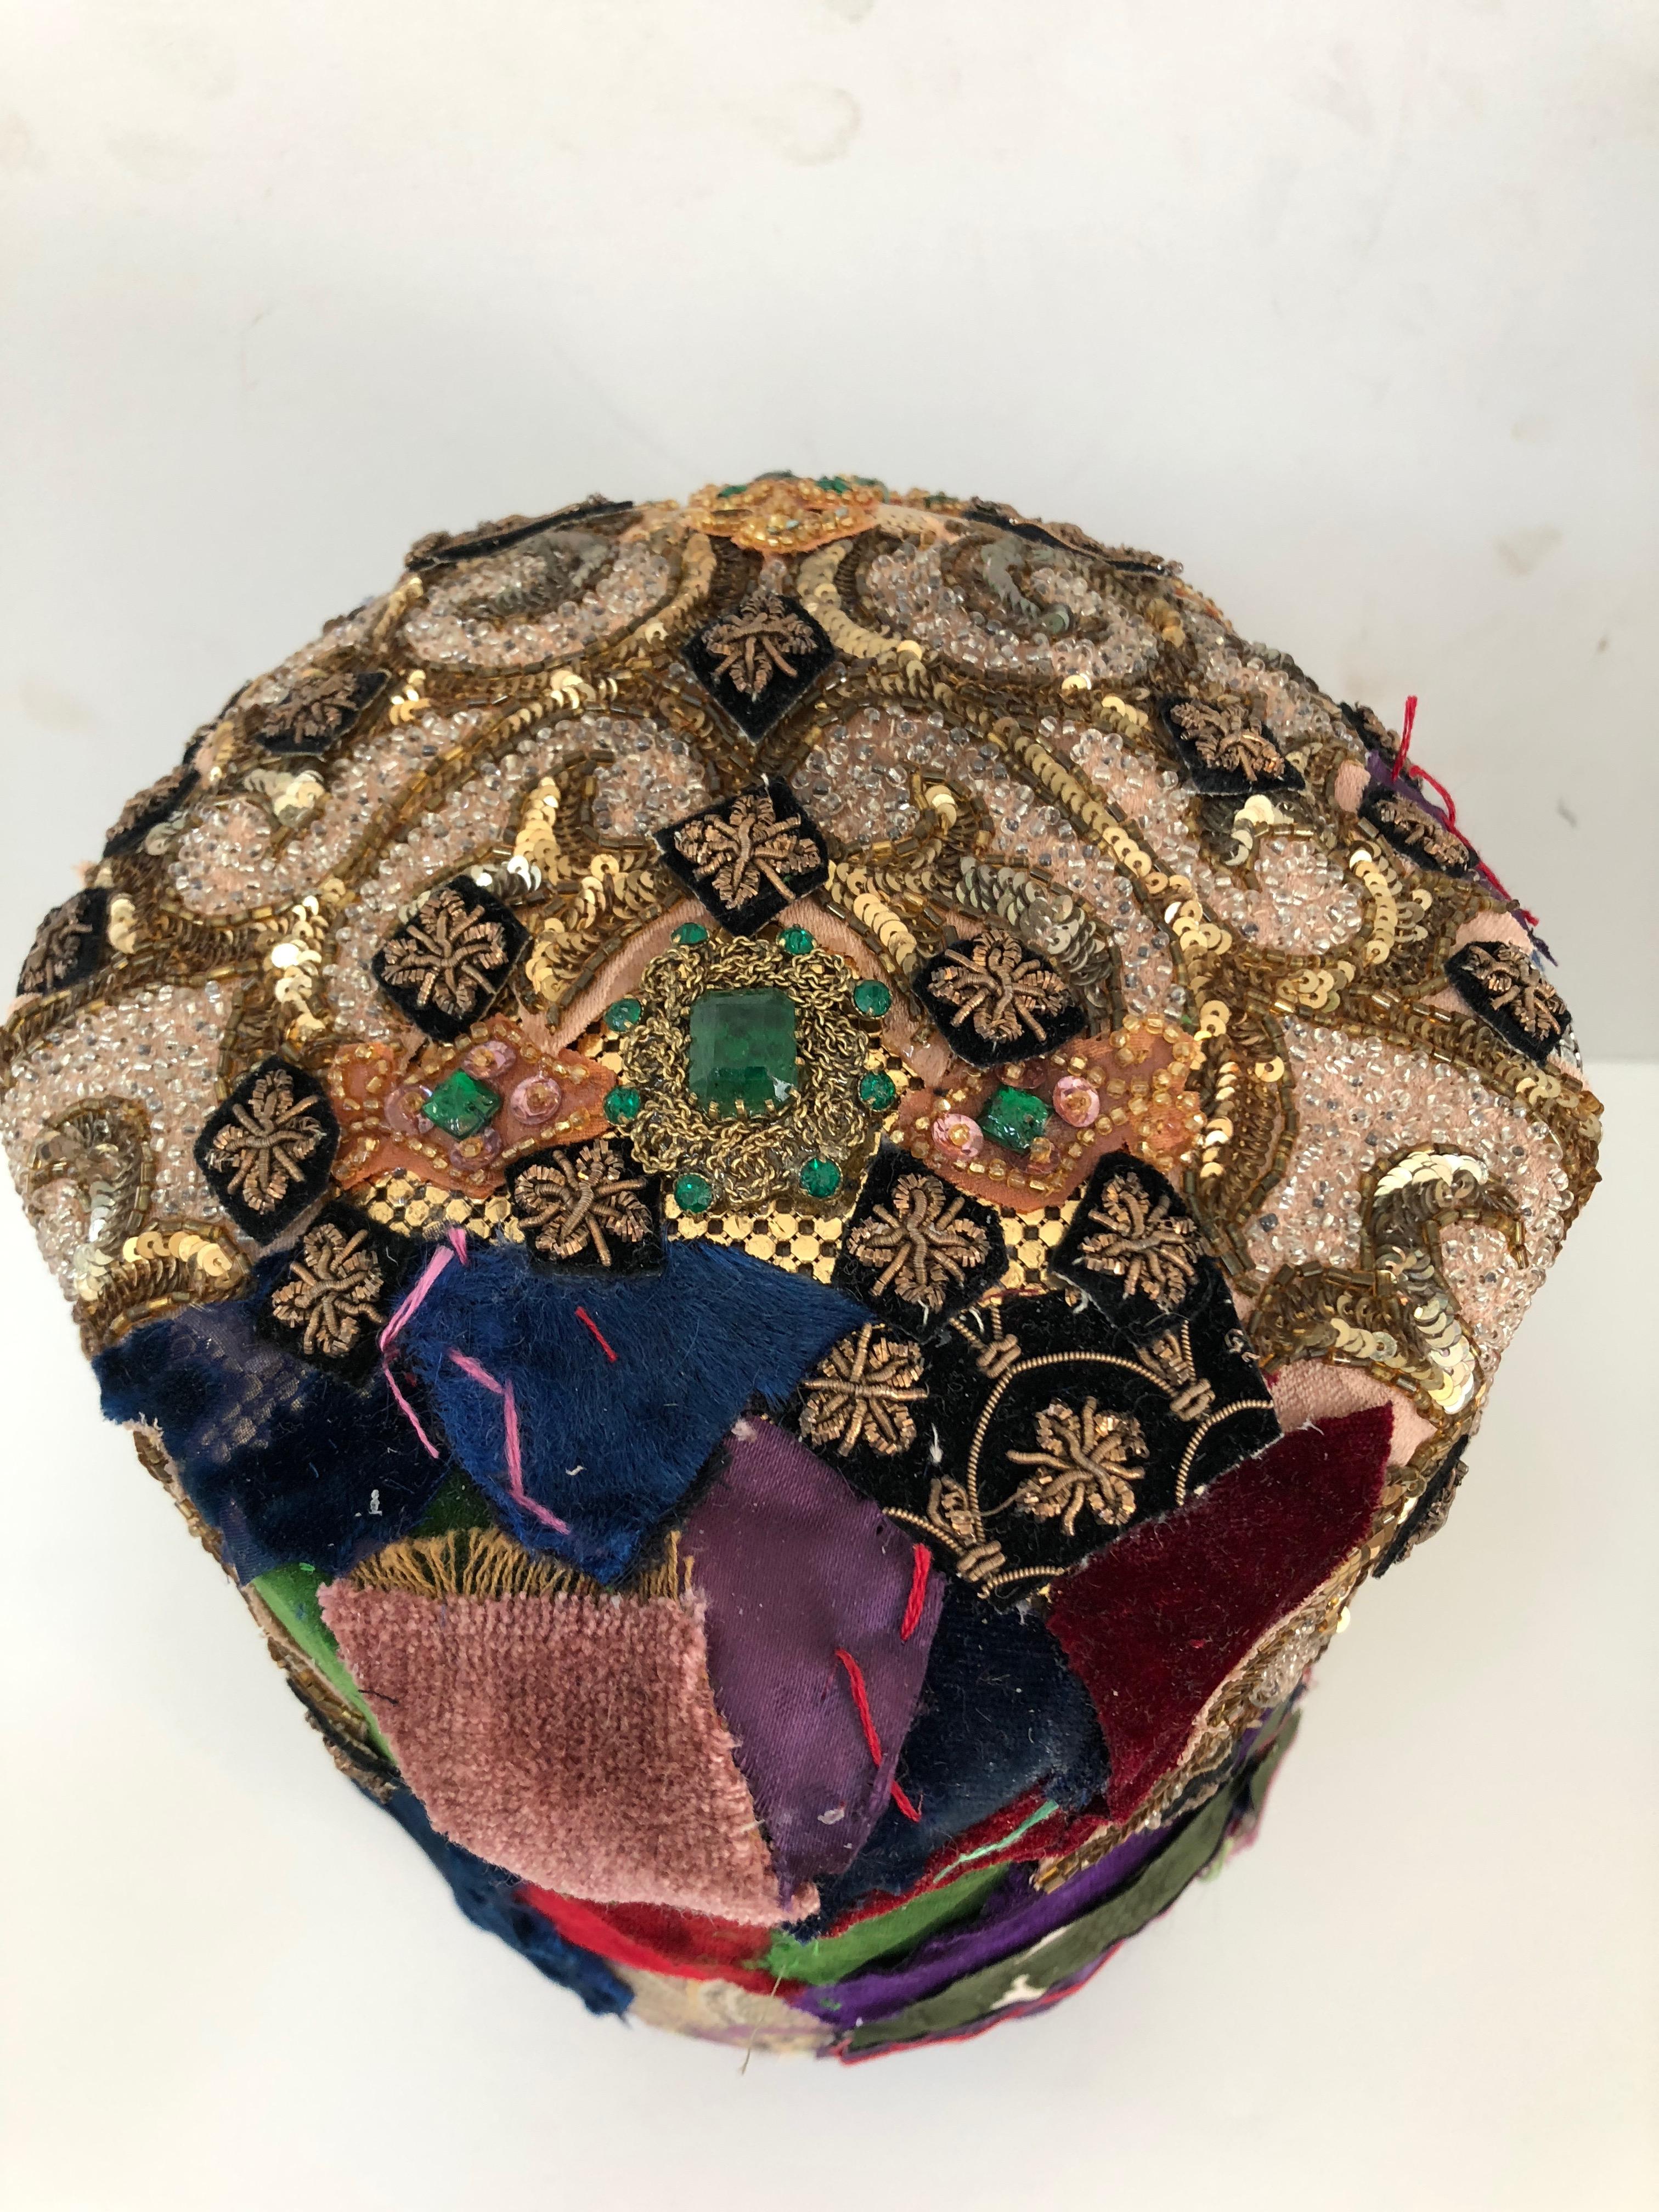 Beautifully handmade found object sculpture that originated as a vintage wood rotating hat form, and has been transformed into a sumptuous work of art. The head and base is meticulously collaged with pieces from a velvet crazy quilt, silver and gold